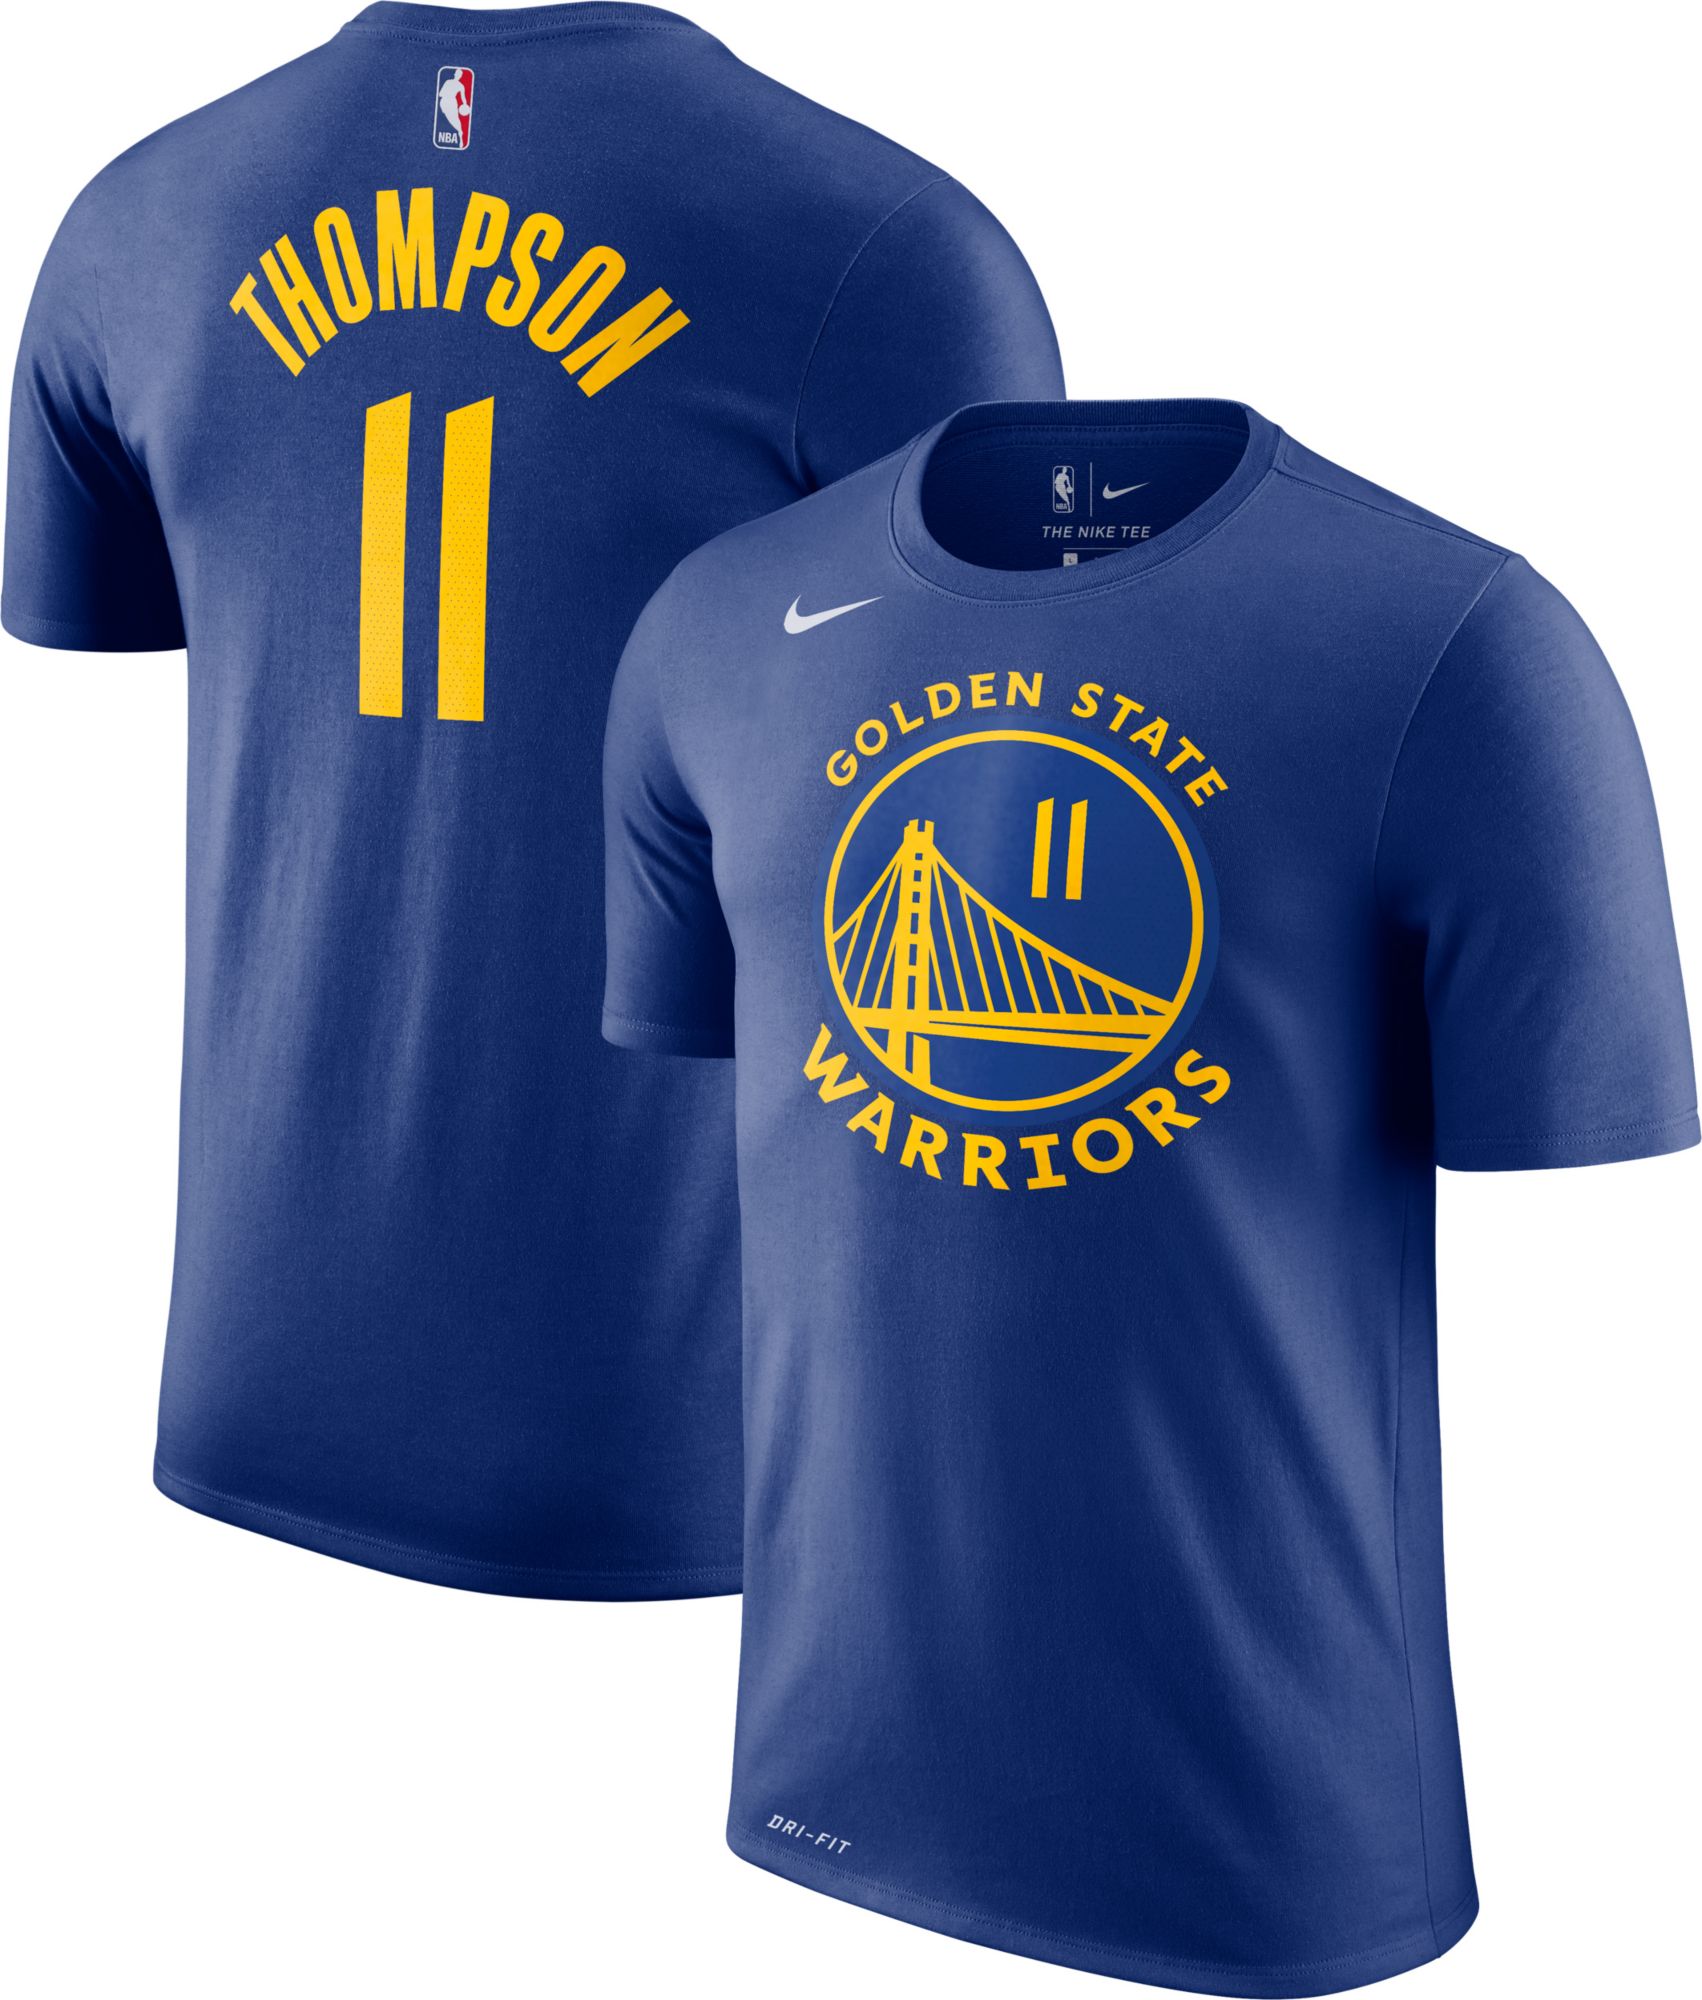 klay thompson the town jersey